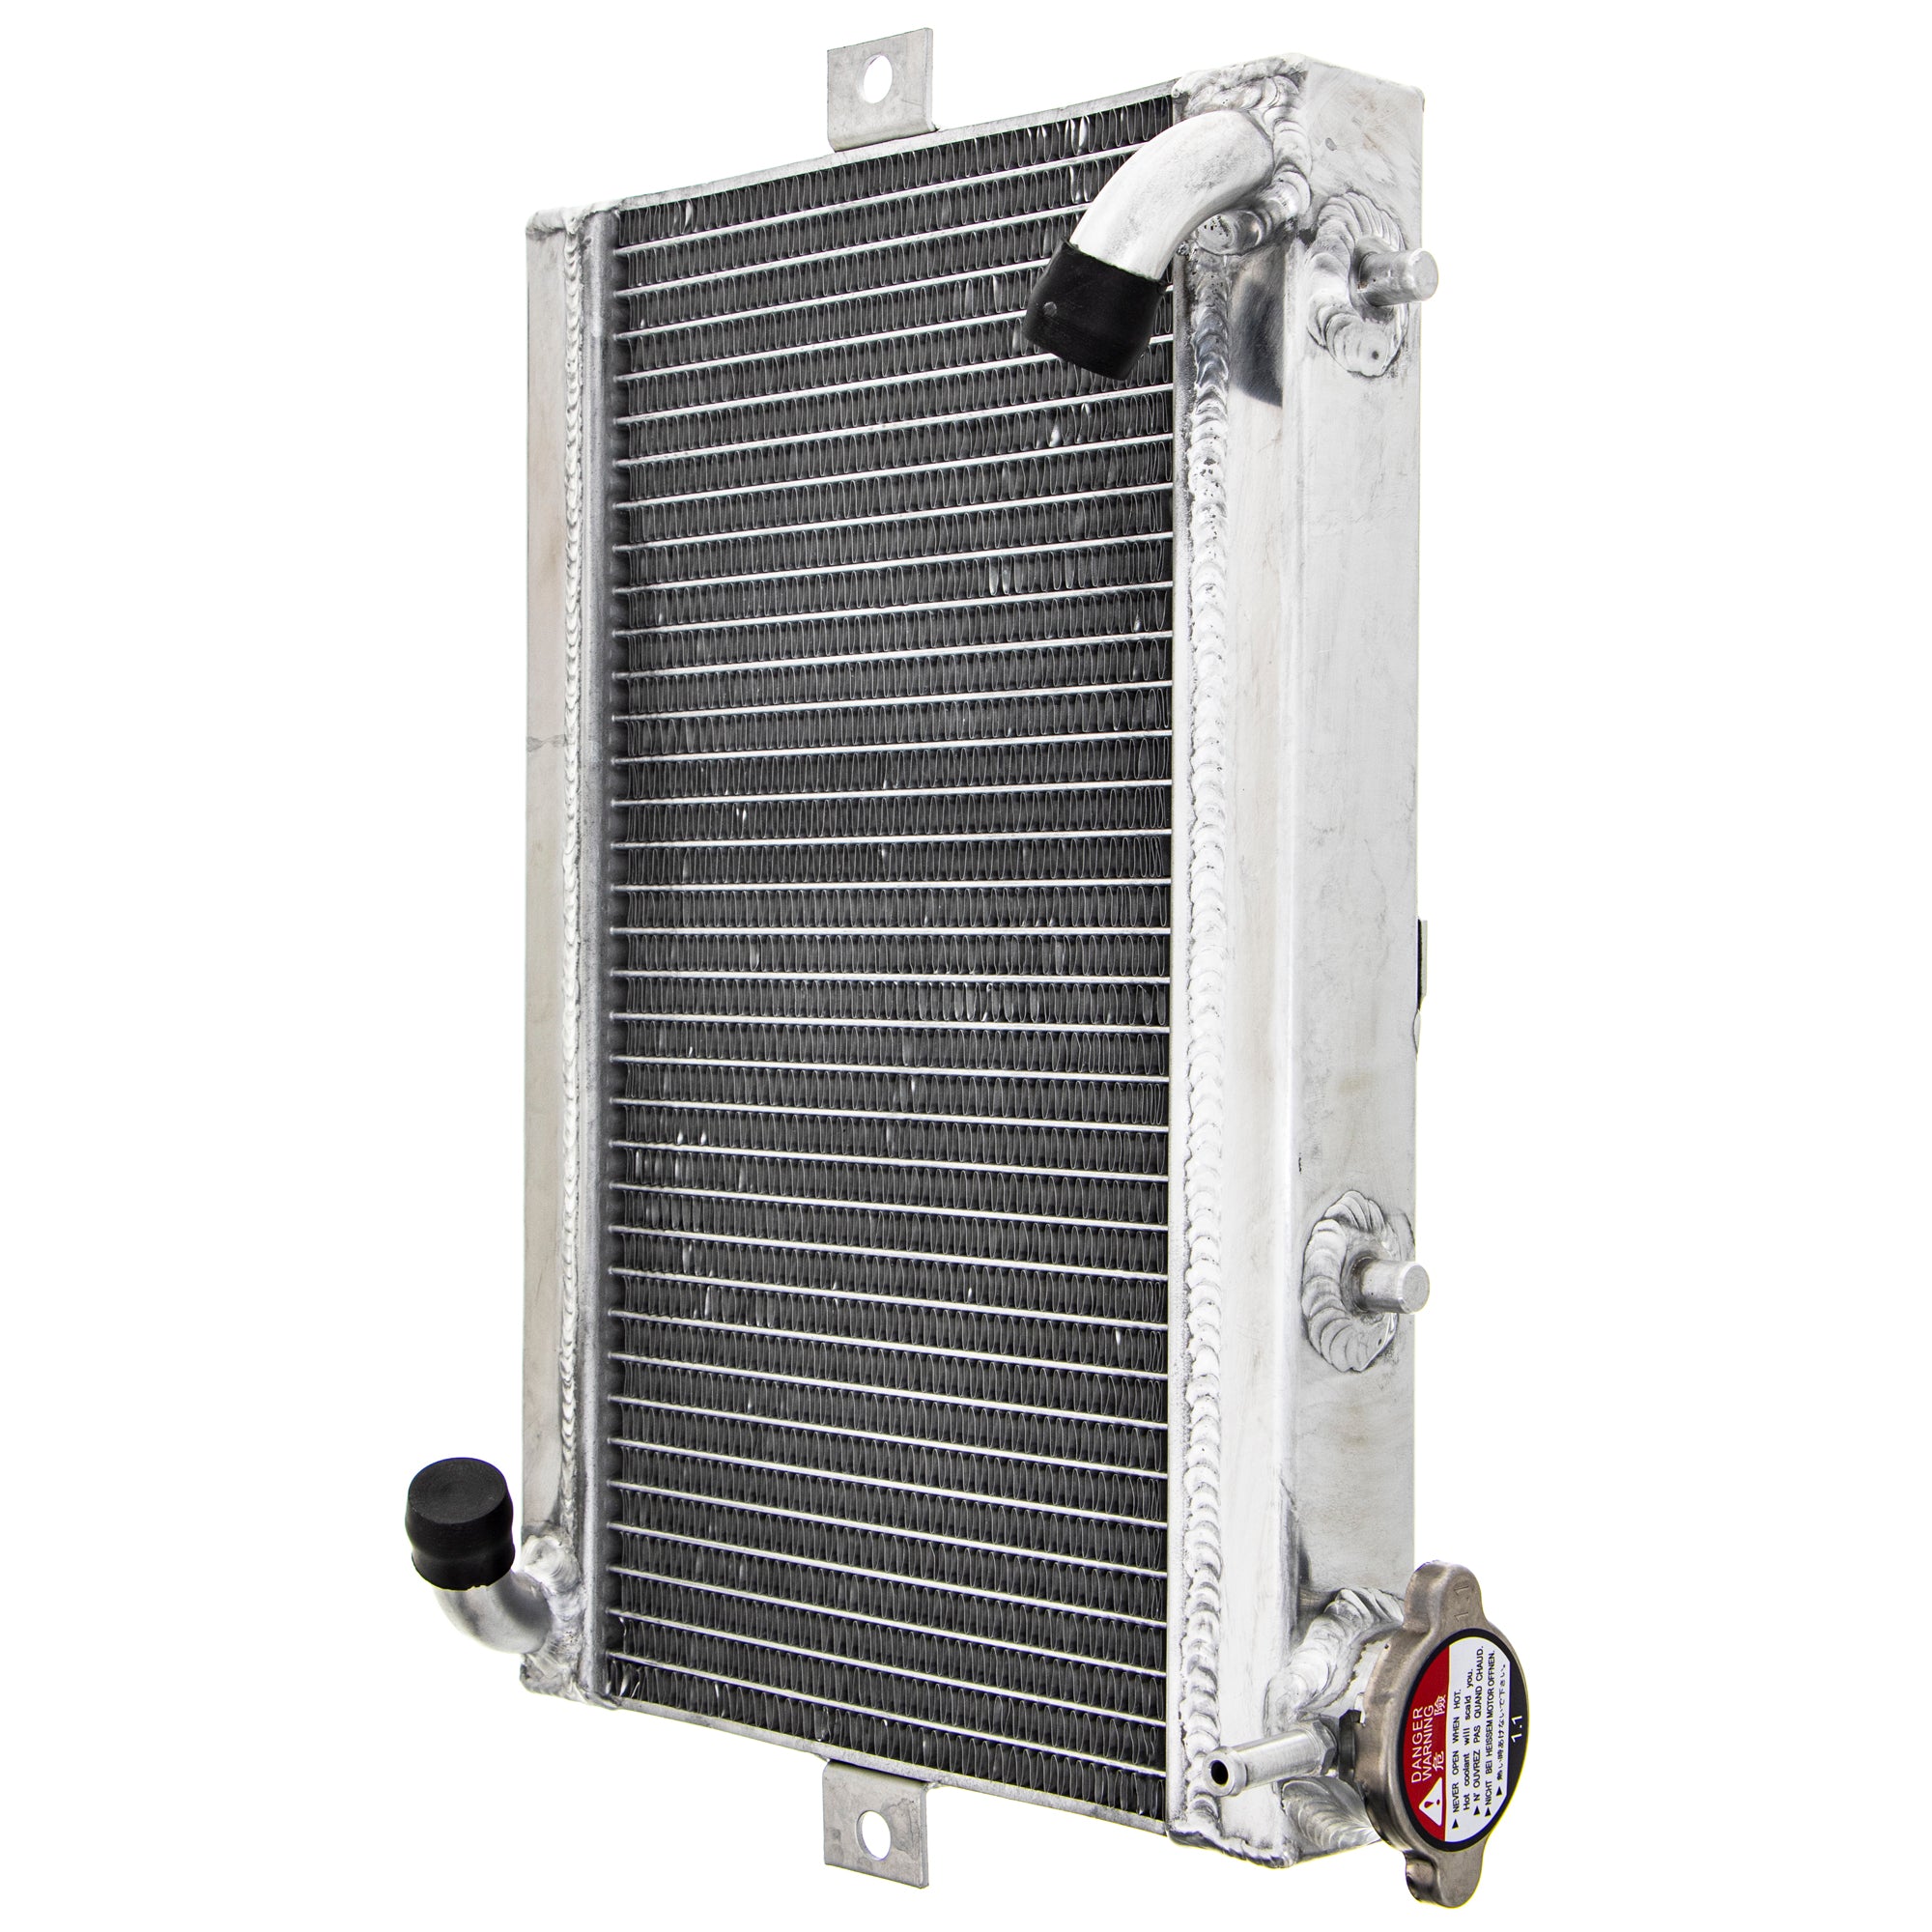 NICHE 519-CRD2242A High Capacity Radiator for zOTHER FourTrax